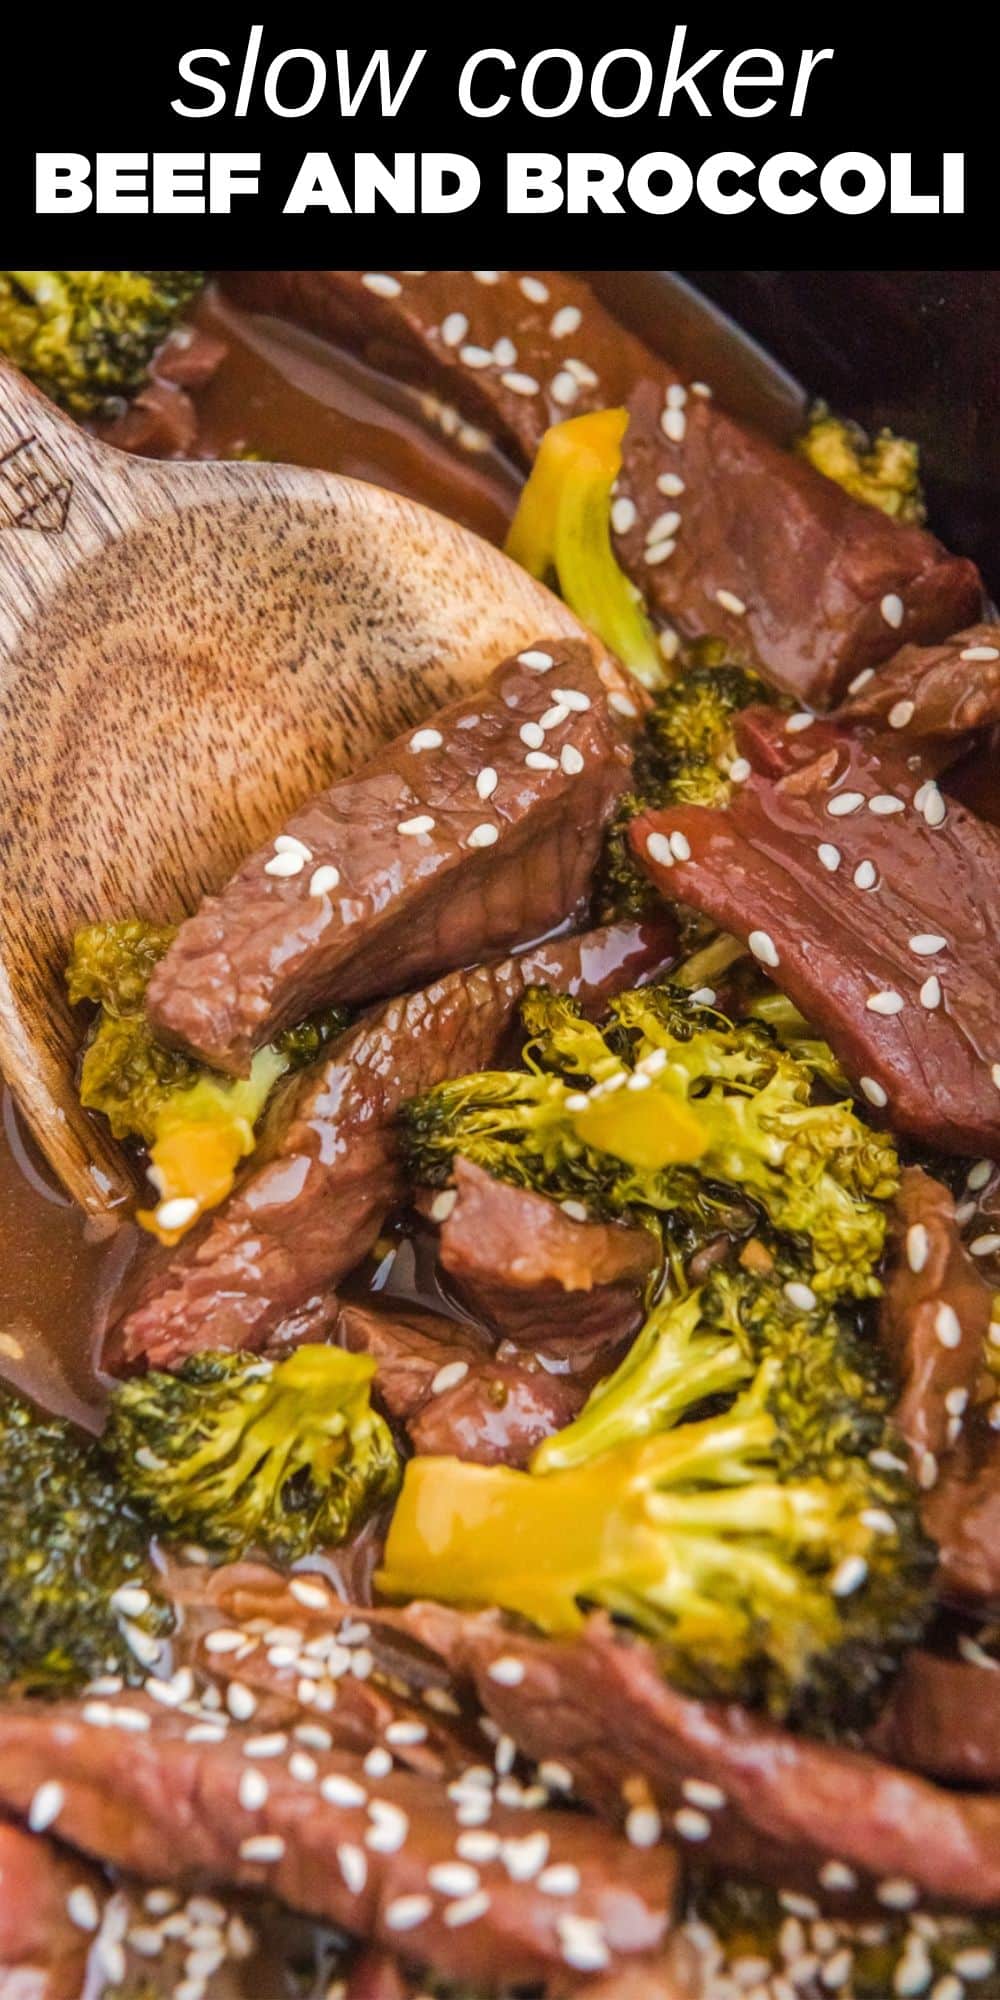 This no-fuss Slow Cooker Beef and Broccoli recipe is filled with juicy and delicious beef with tender broccoli florets simmered low and slow in a sweet and savory garlicky sauce. It's makes the perfect weeknight meal that the entire family will love. 